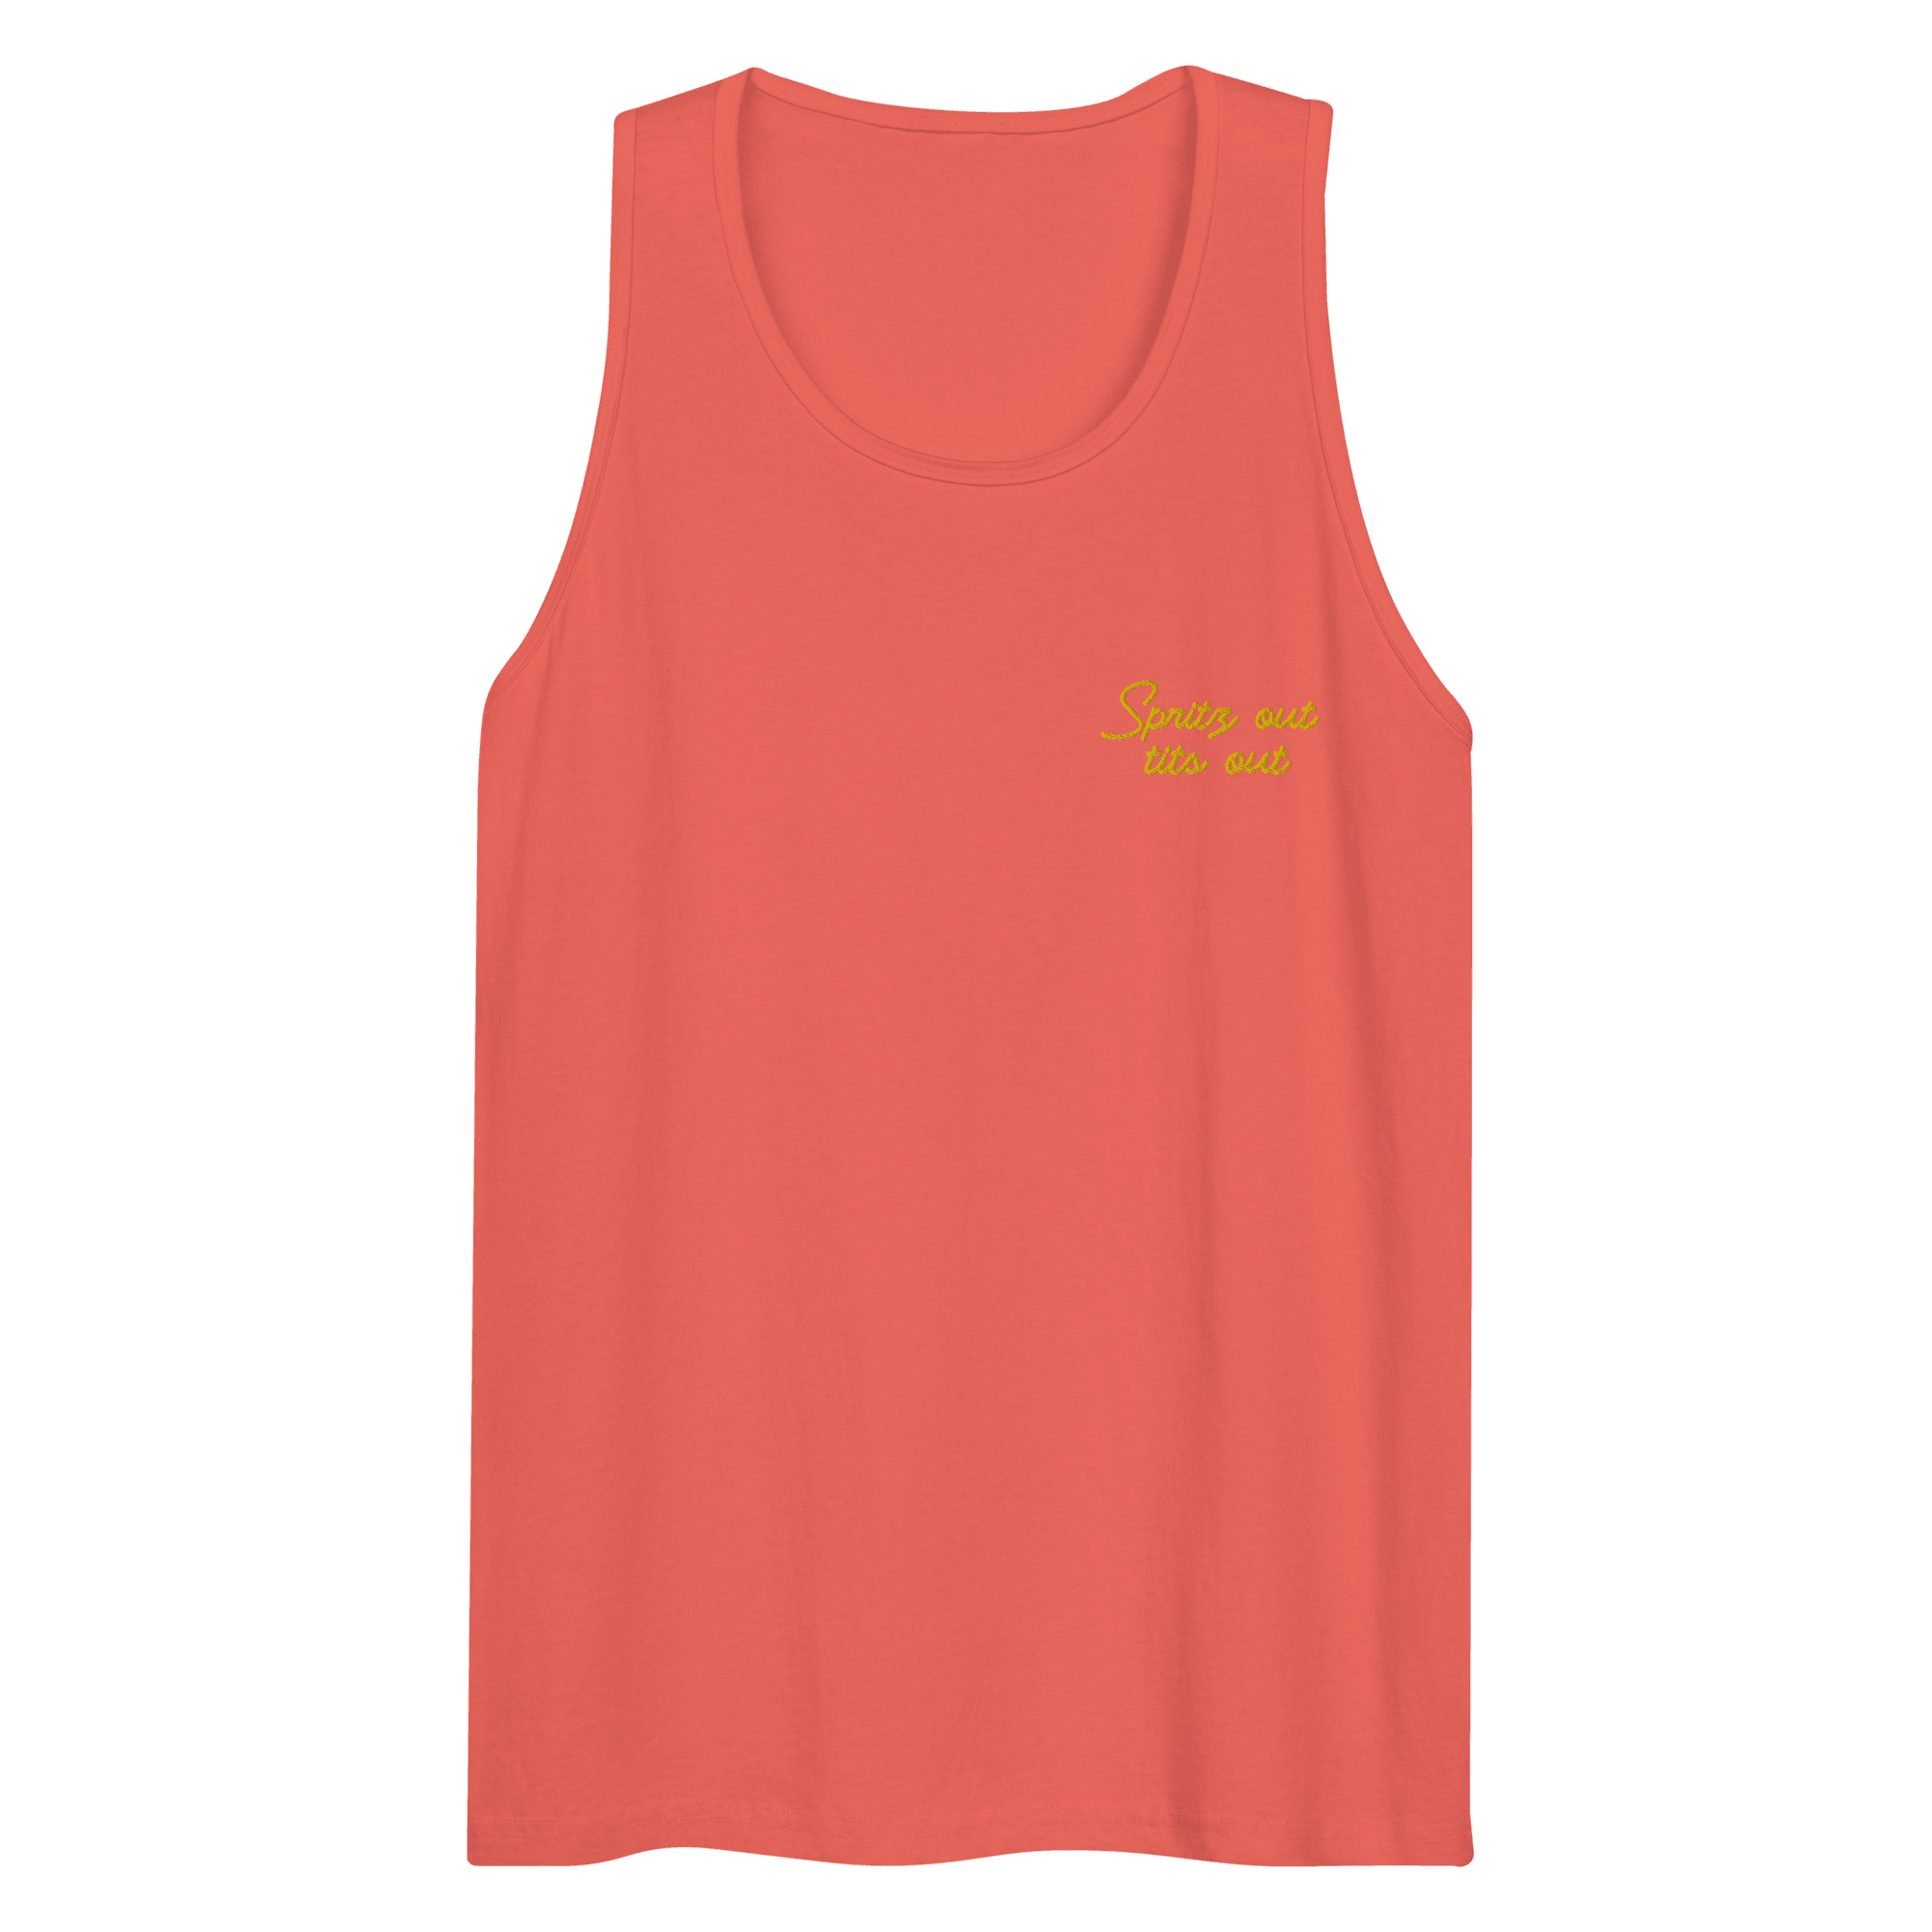 Spritz out, tits out Embroidered Men's Tank Top - Polychrome Goods 🍊